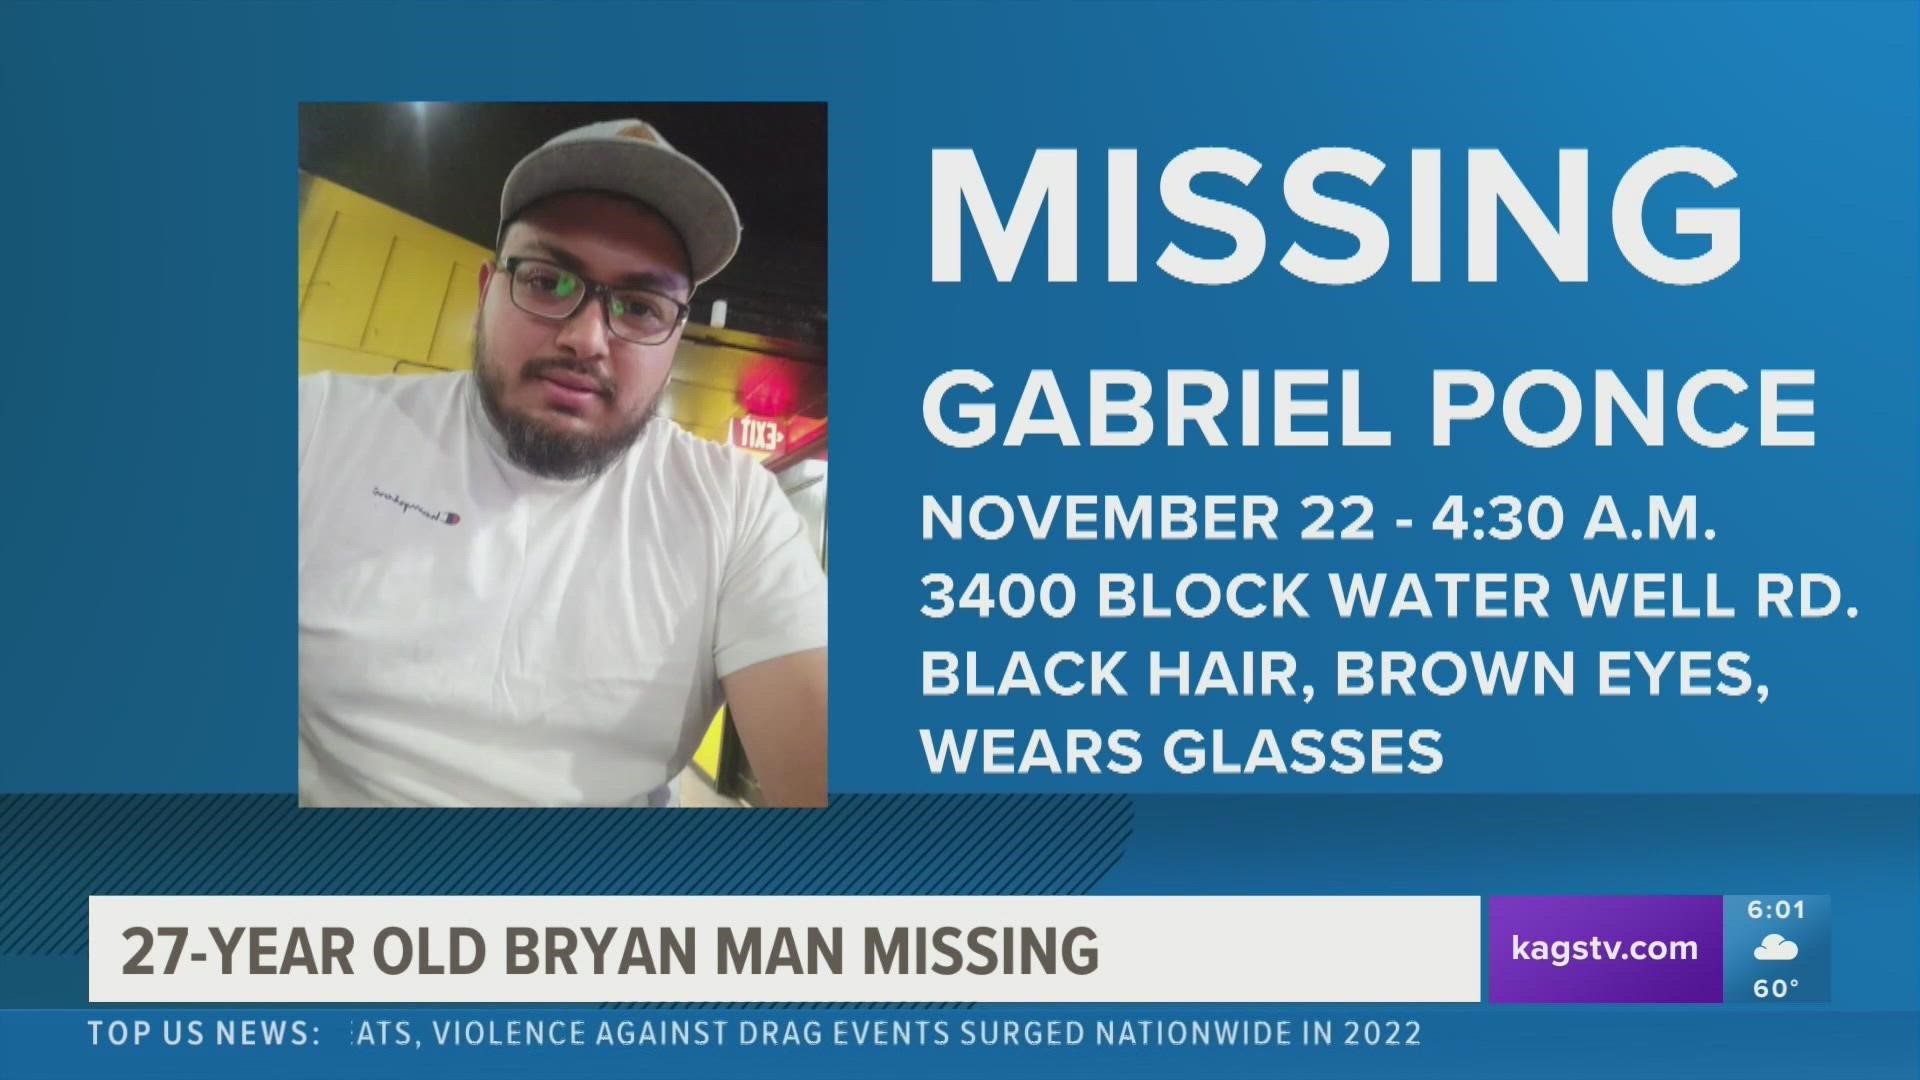 The sheriff's office says Gabriel Isaac Ponce was last seen leaving his home in the 3400 block of Water Well Road in Brazos County around 4:30 a.m. Tuesday.